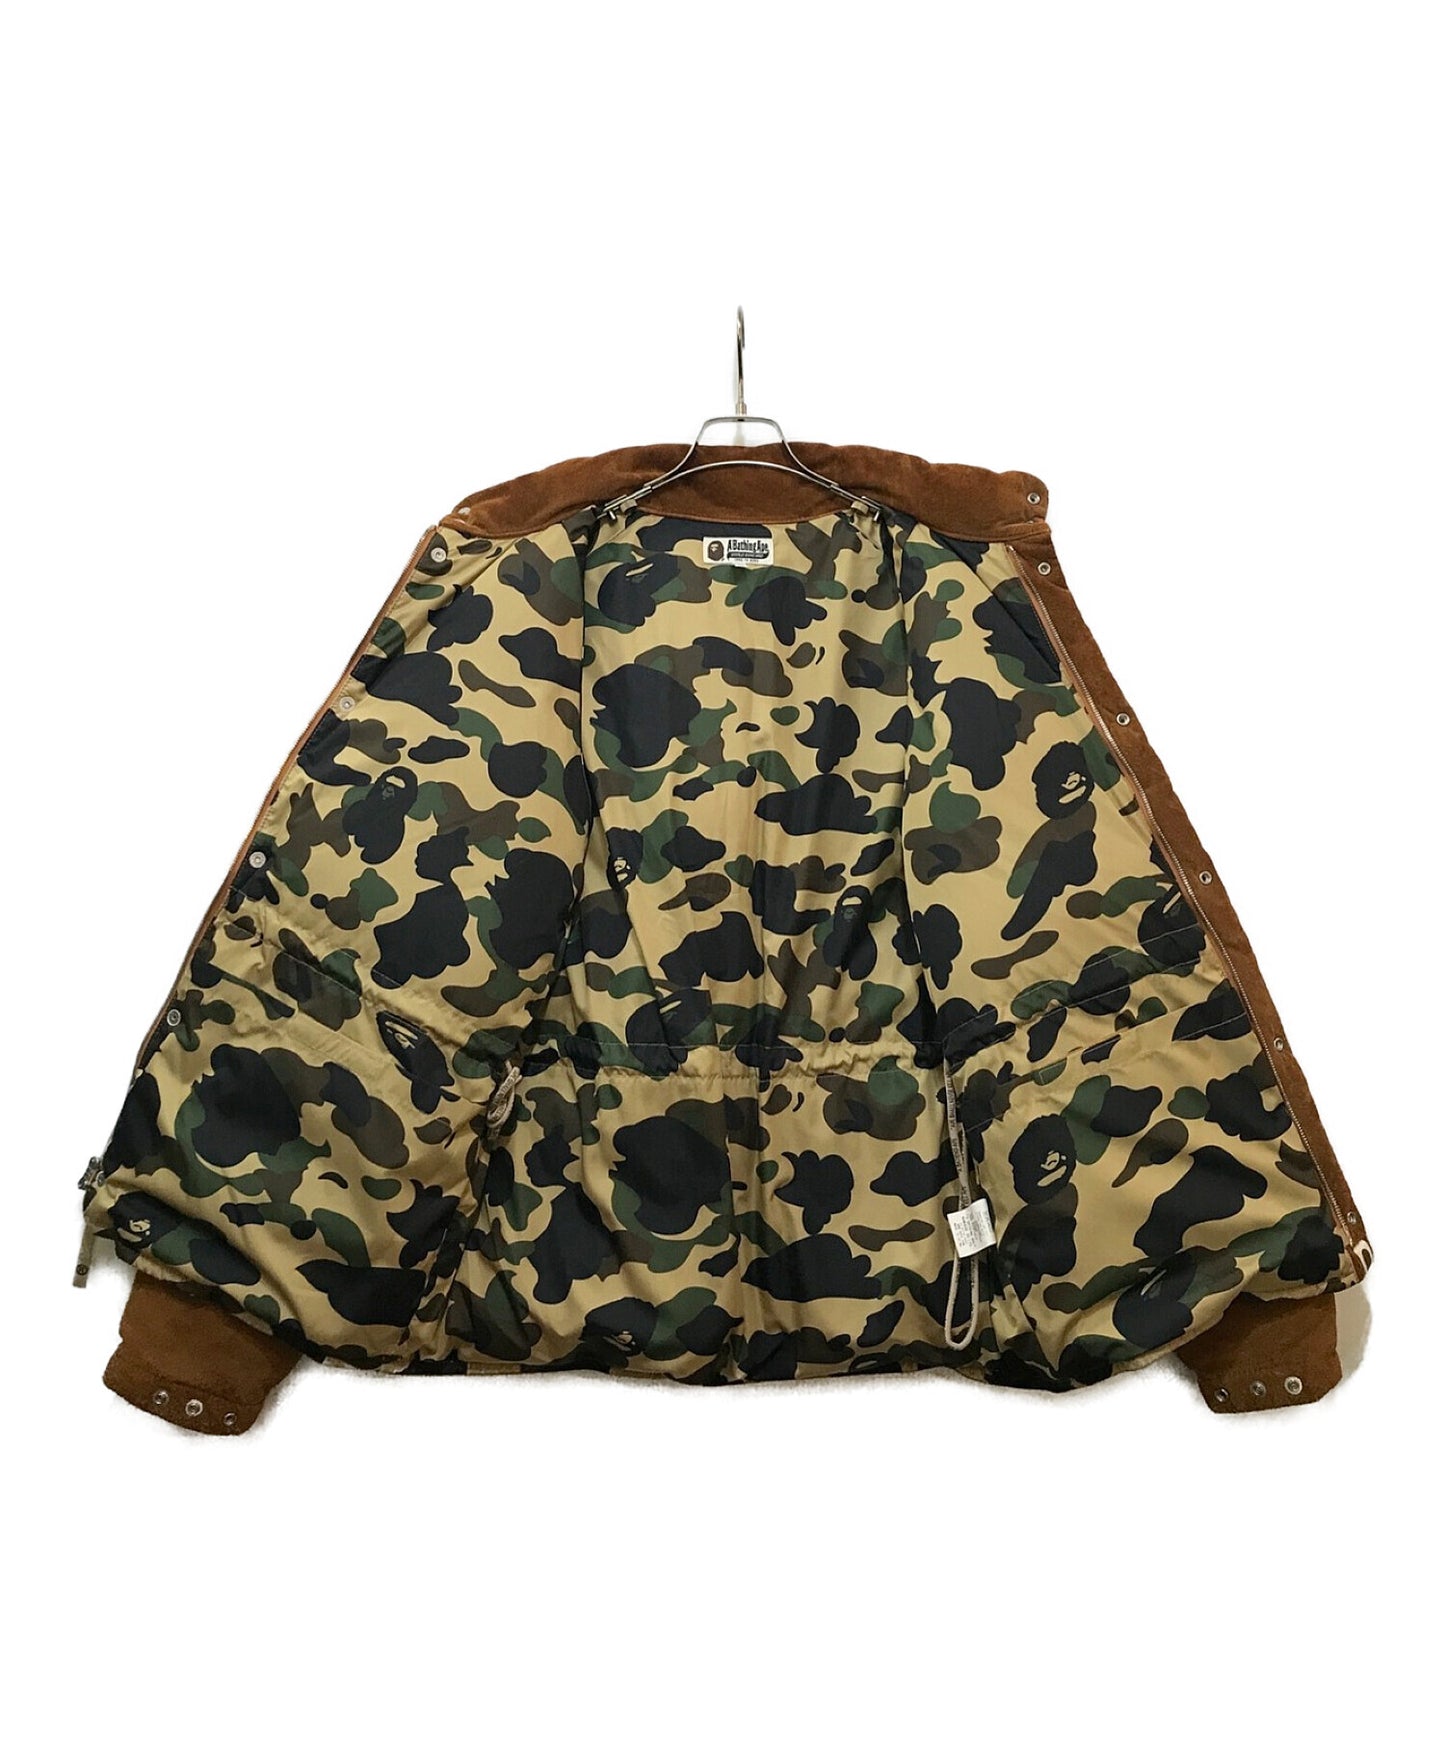 [Pre-owned] A BATHING APE Suede Down Jacket 001hj9801024